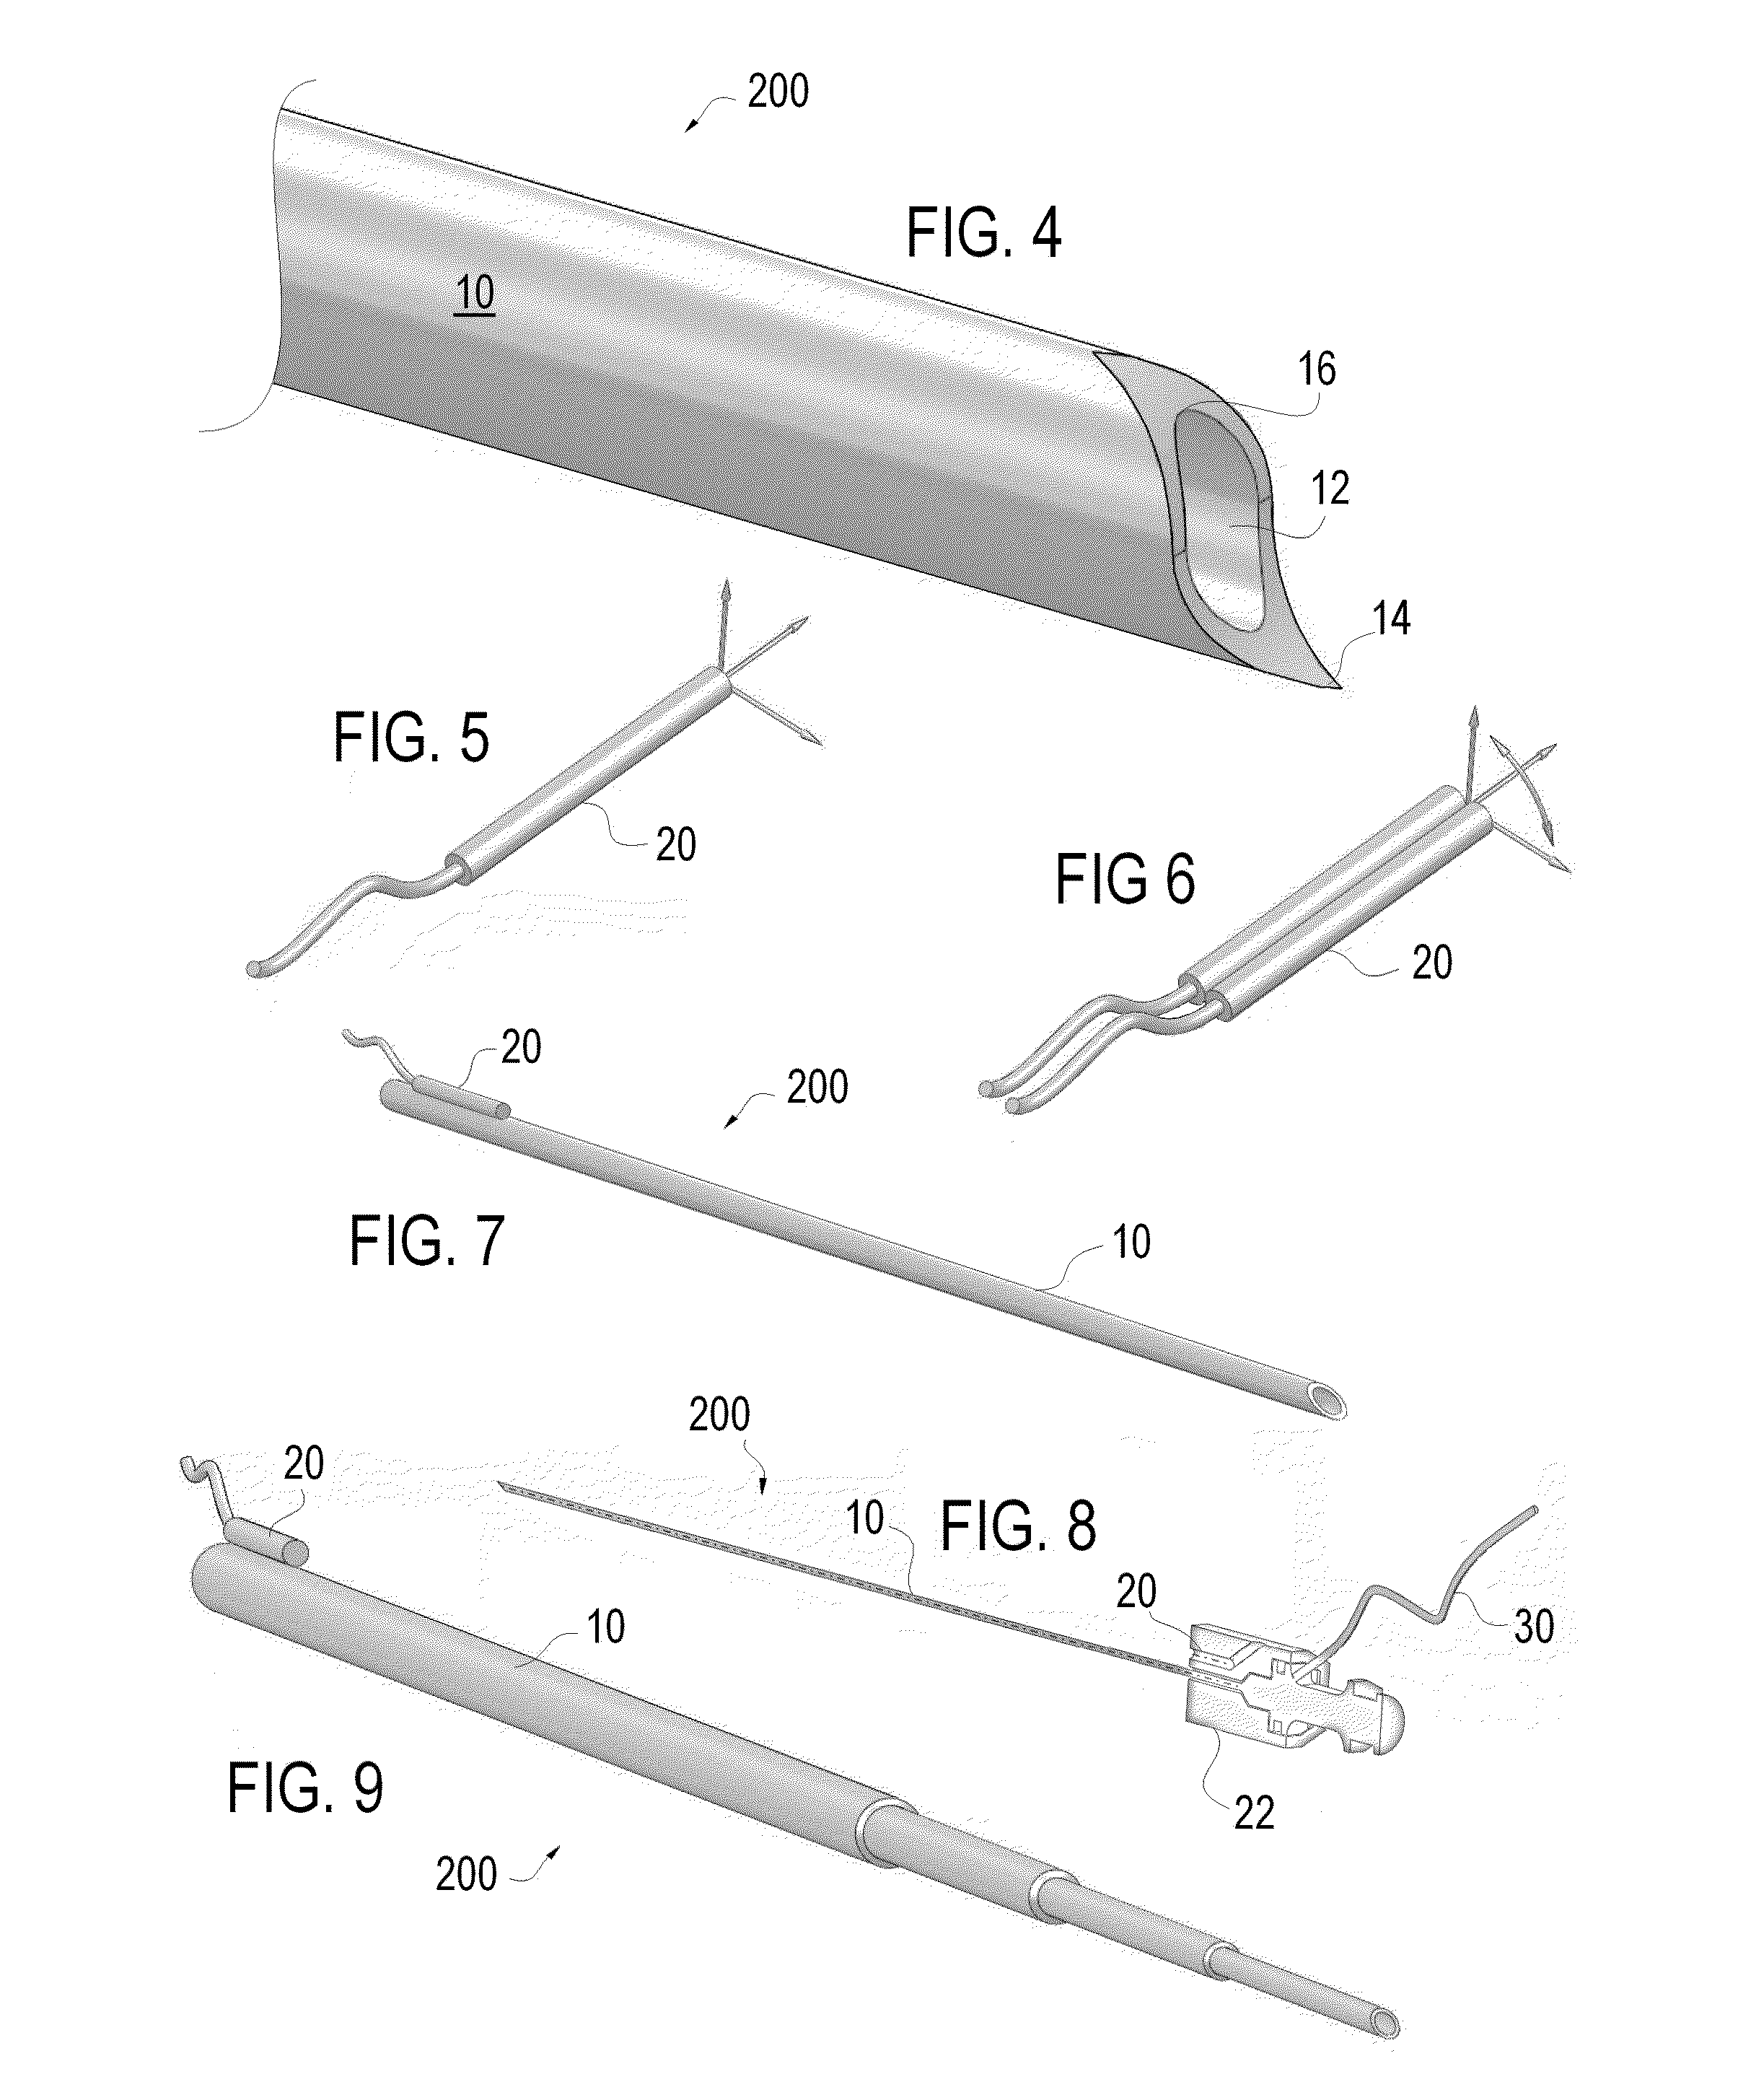 System and method of image guided pericardial procedures including pericardioscopy, pericardial ablation, pericardial material delivery, pericardial tissue grasping and manipulation, pericardial lead placement, and pericardial surgical fastener placement